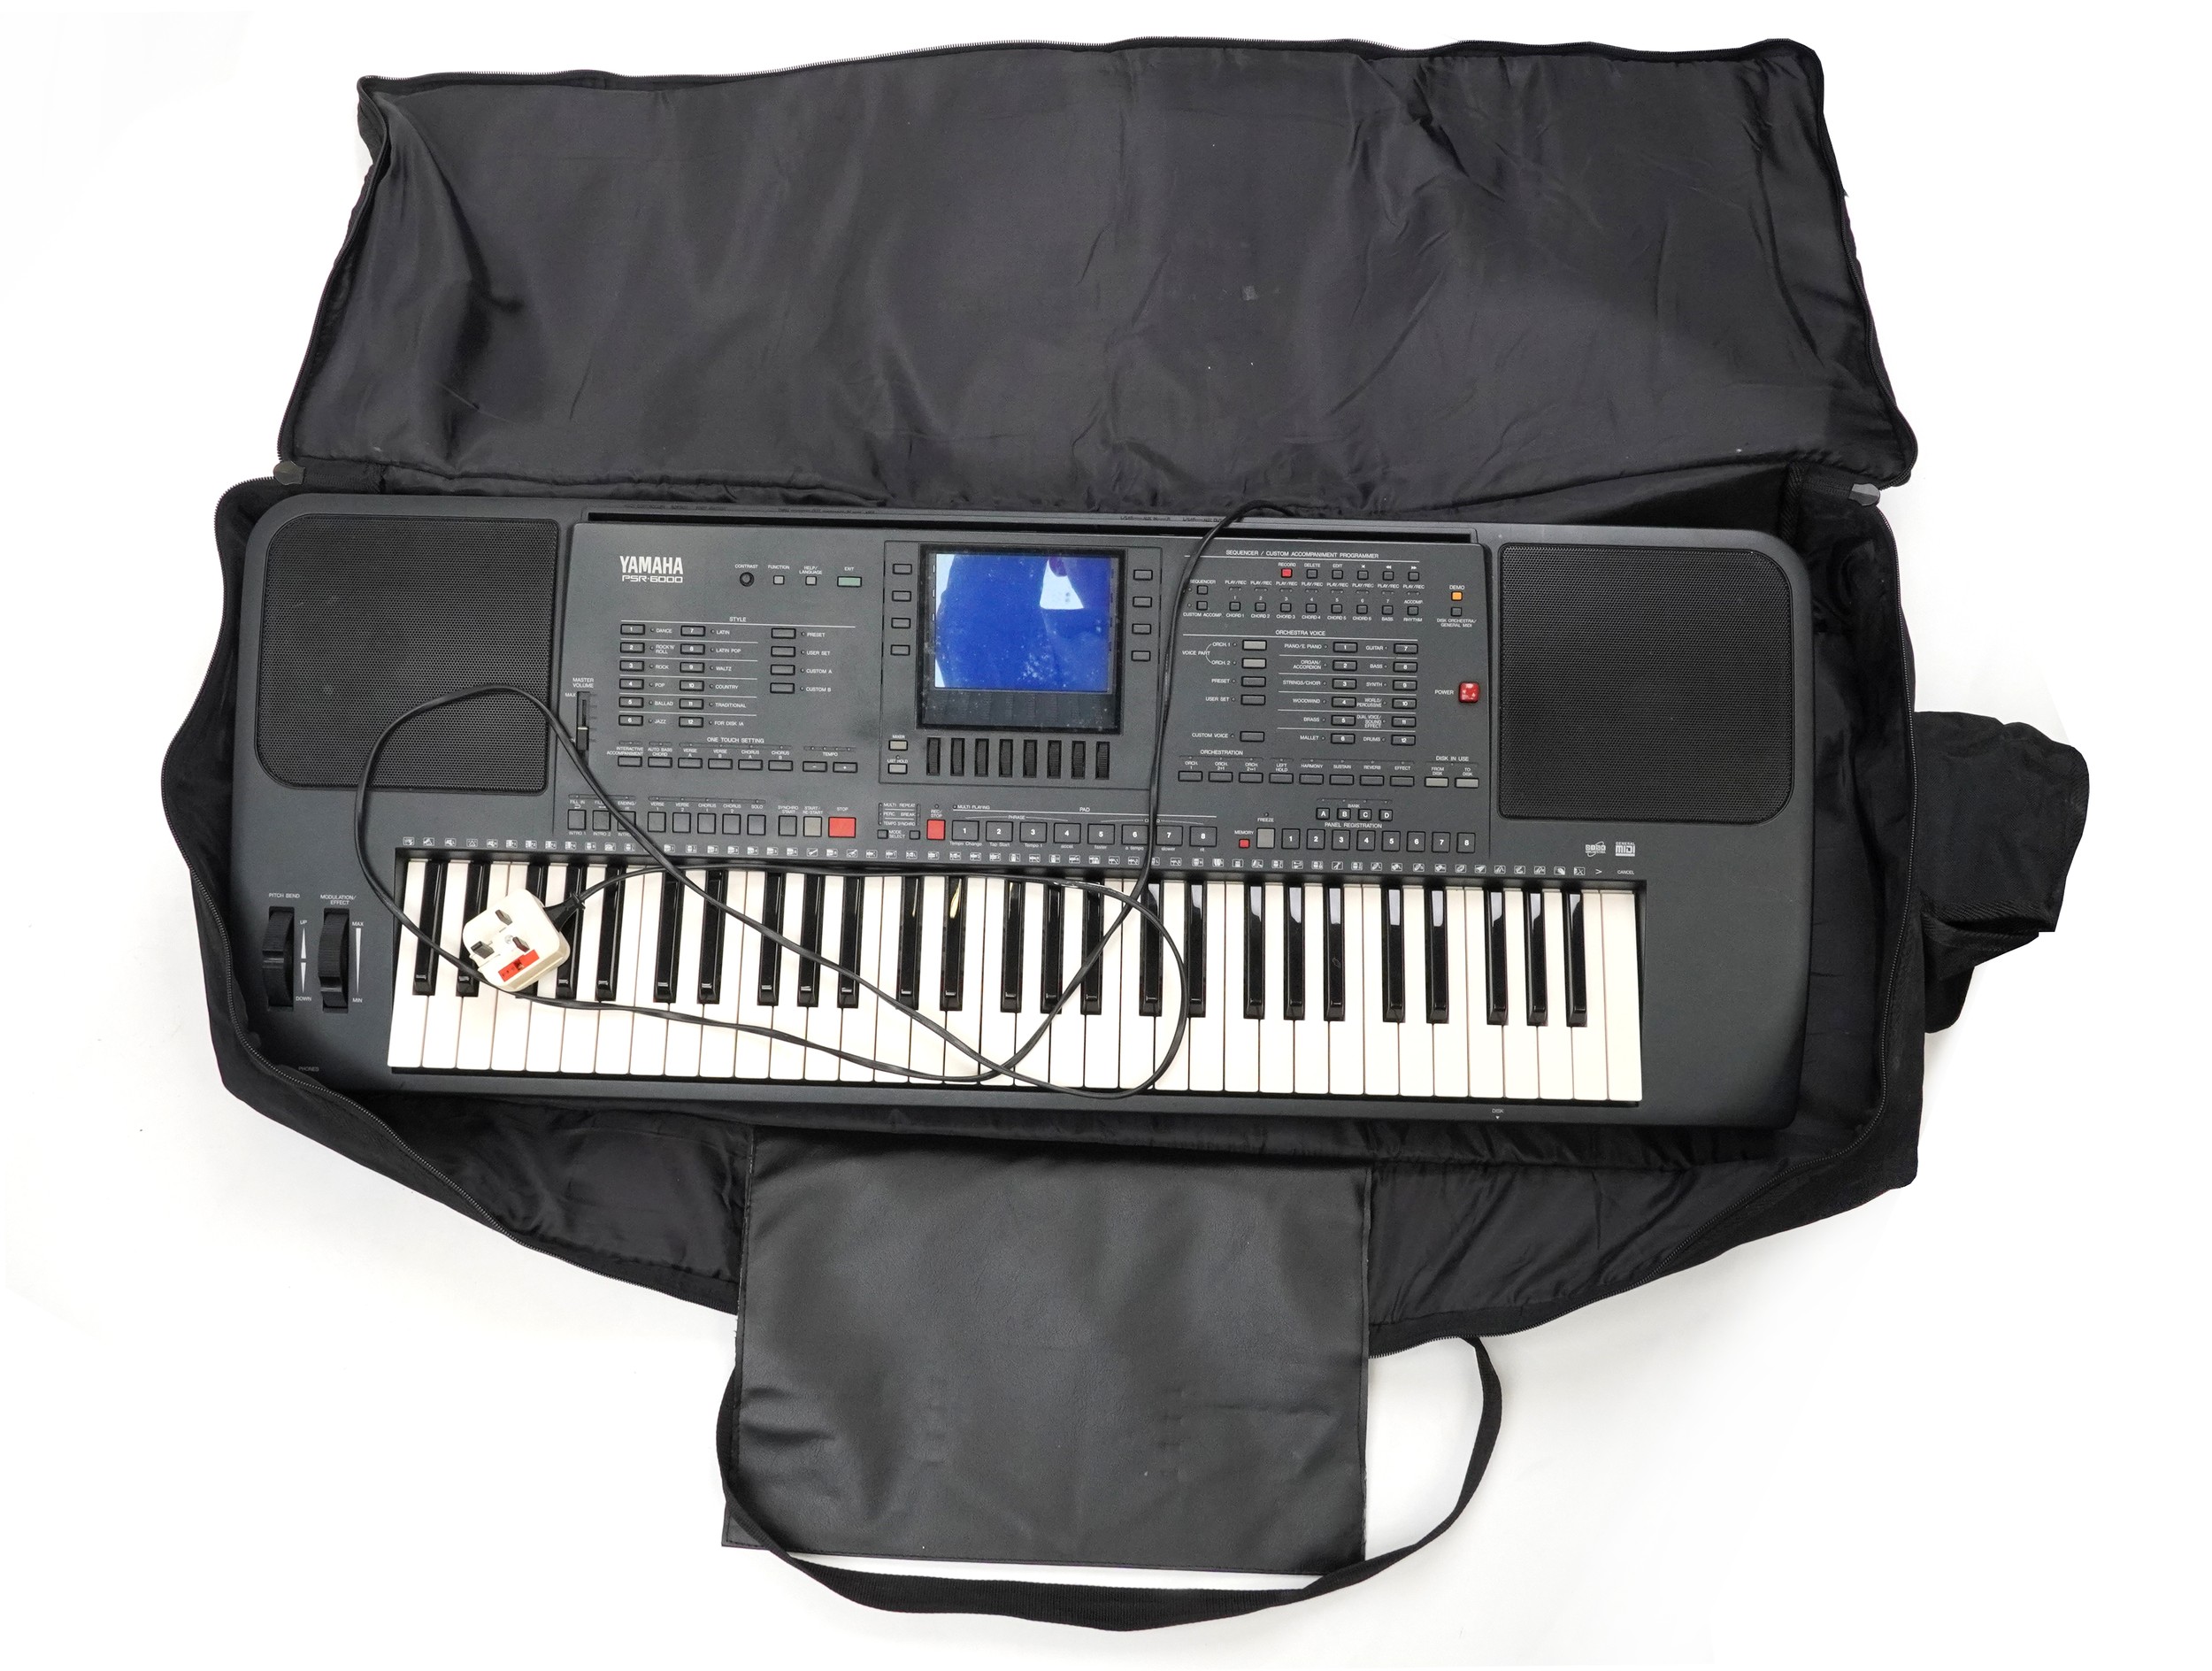 Yamaha PSR-6000 electric keyboard with stand and protective bag - Image 4 of 4